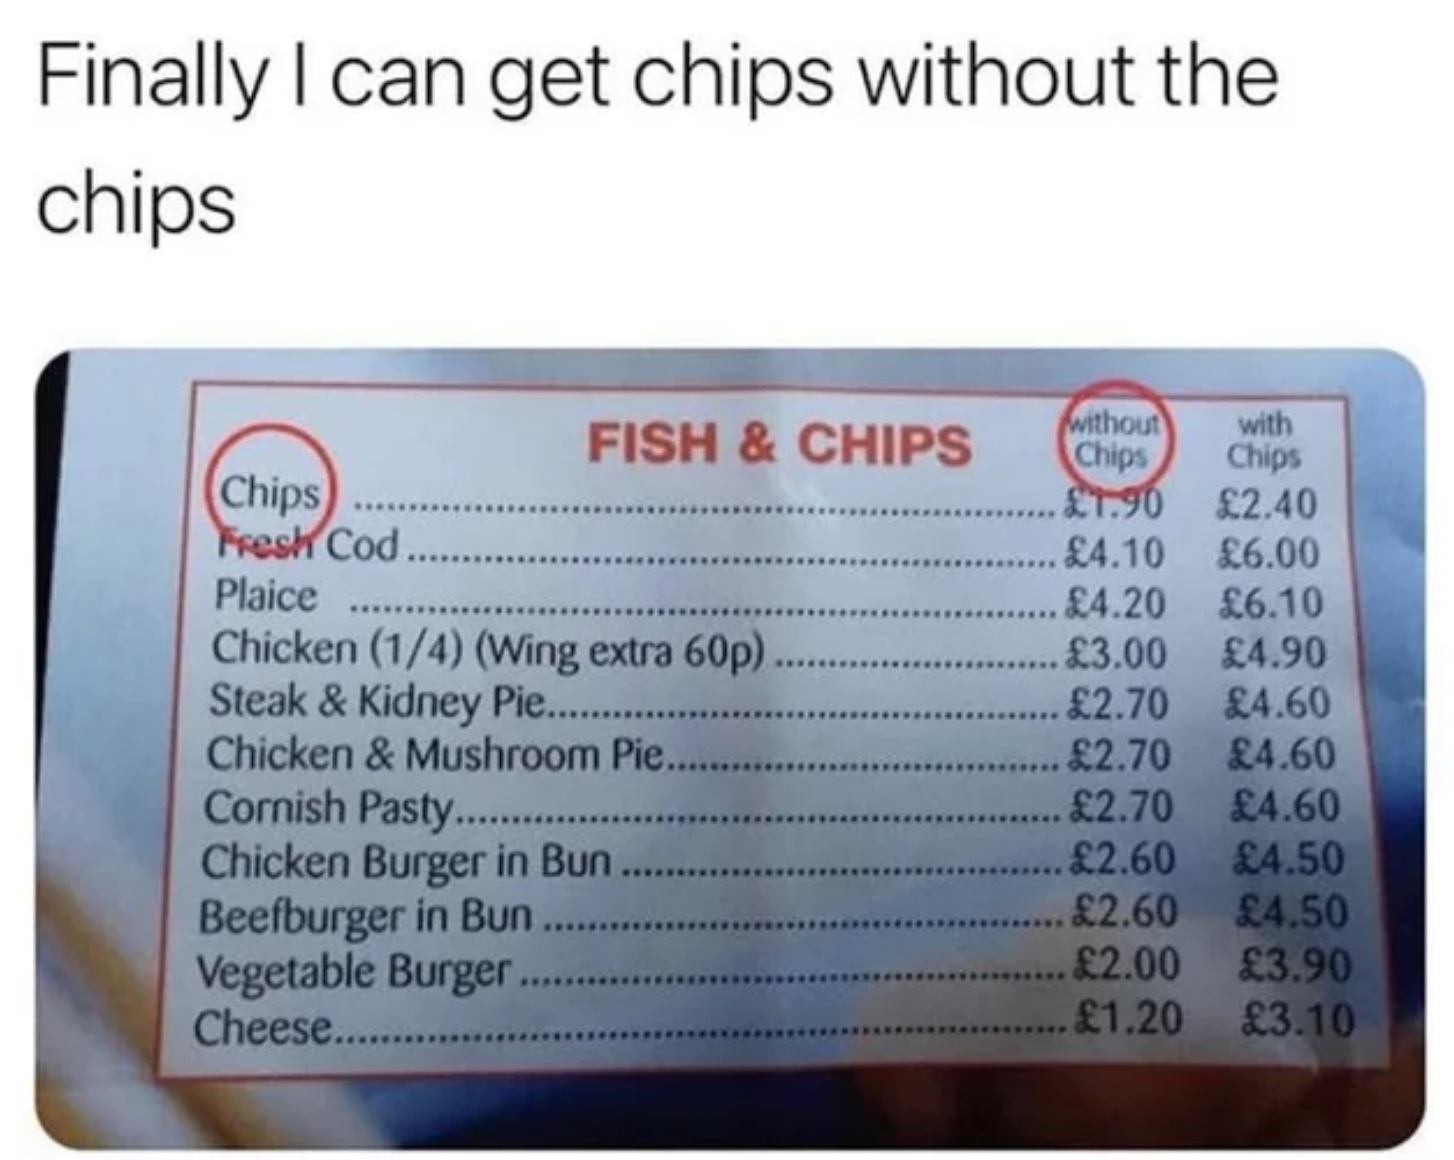 Pictures that techincally tell the truth - chips without chips - Finally I can get chips without the chips Fish & Chips Chips Fresh Cod........ Plaice Chicken 14 Wing extra 60p. Steak & Kidney Pie...... Chicken & Mushroom Pie.............. Cornish Pasty..